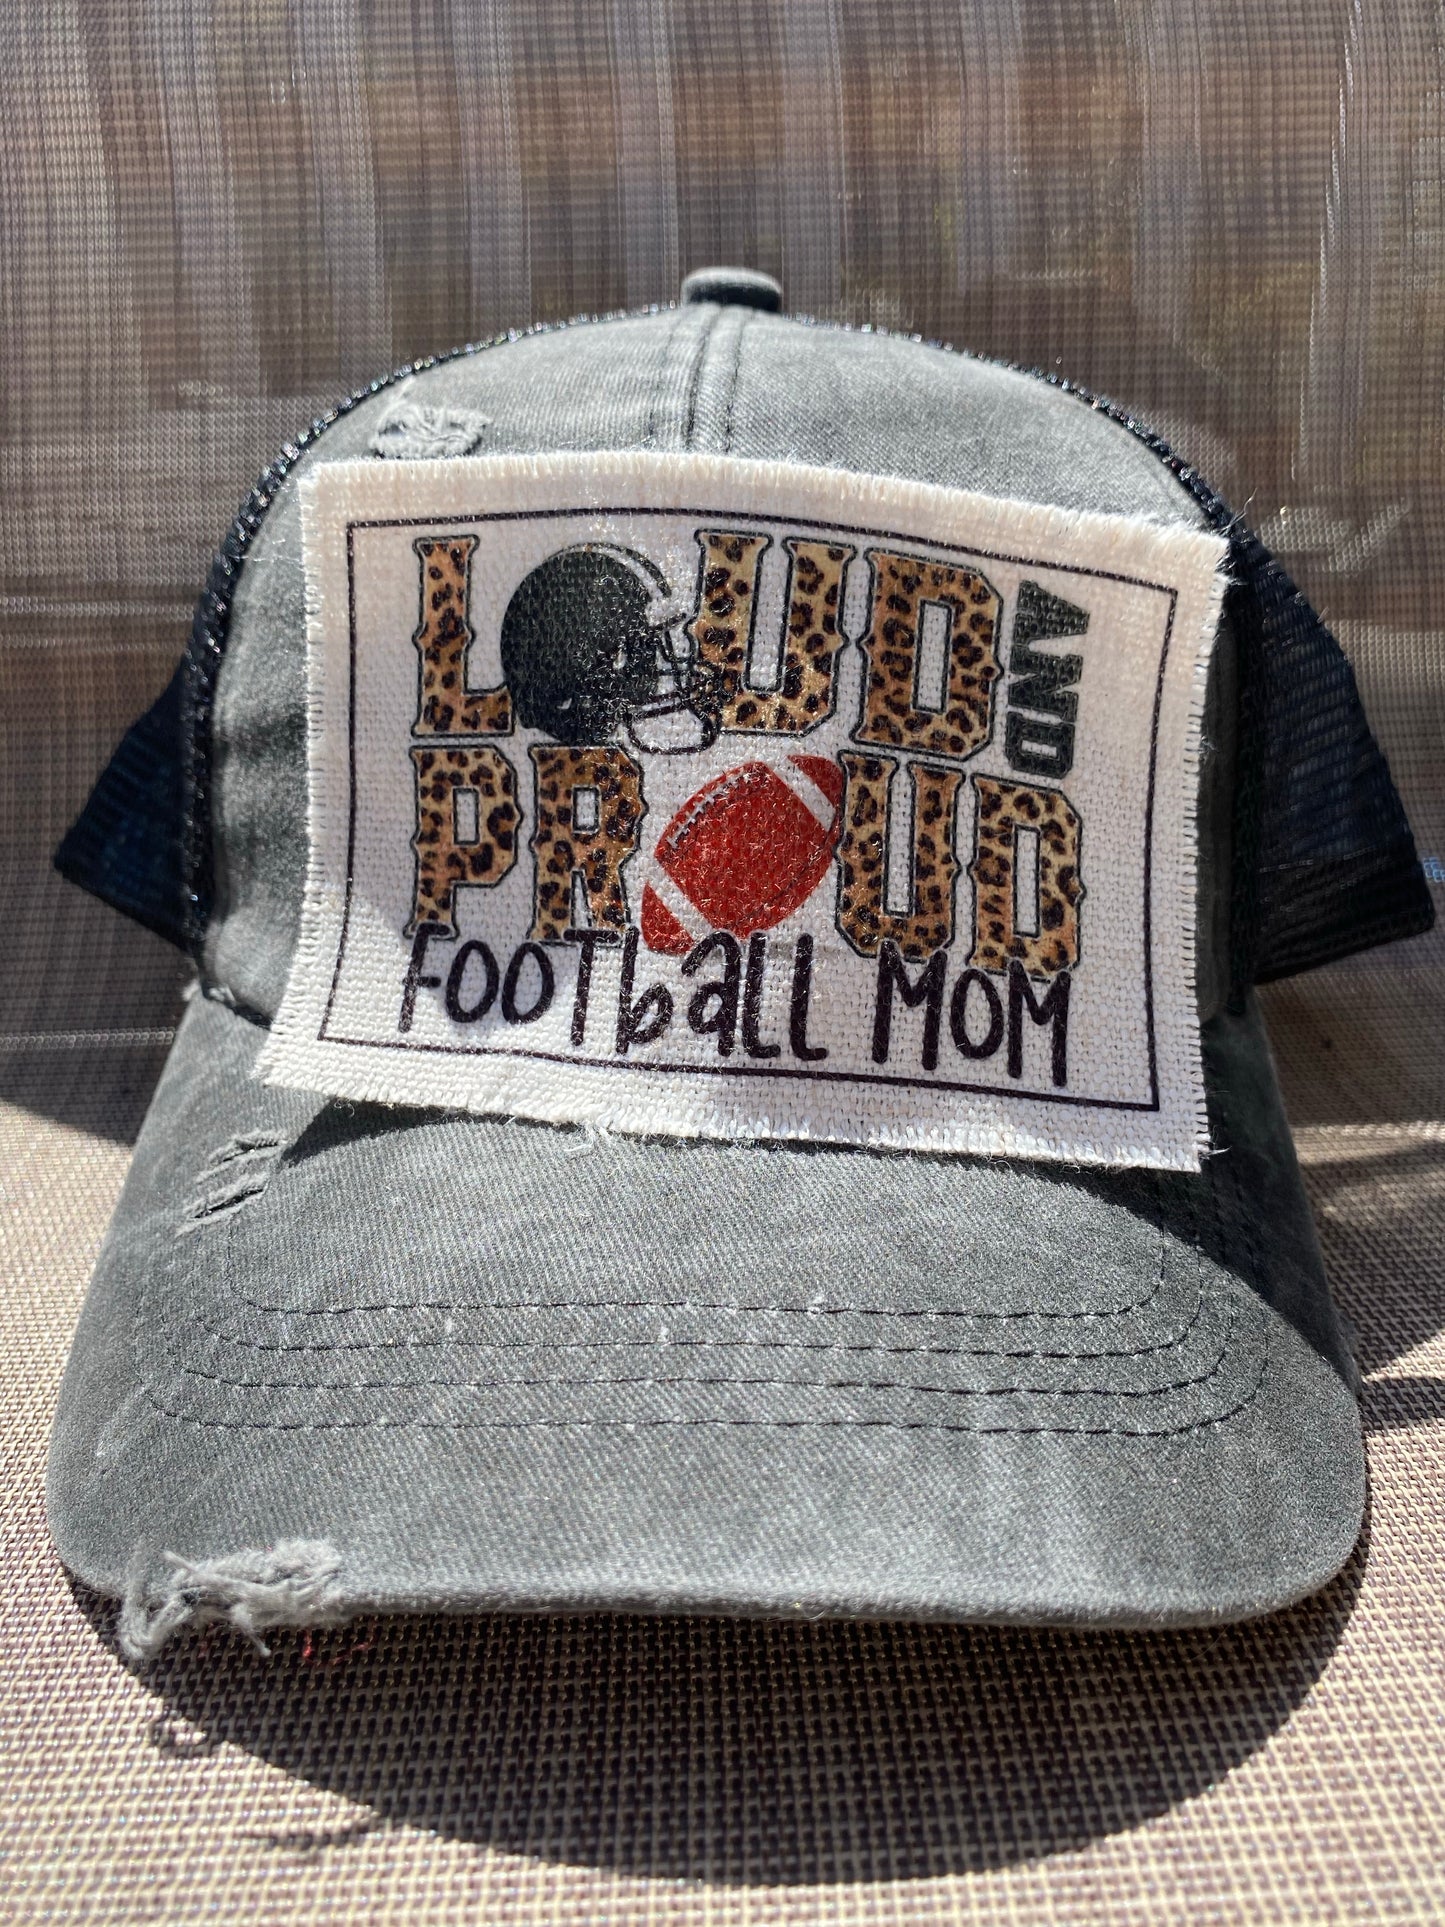 Loud and Proud Football Mom Hat Patch